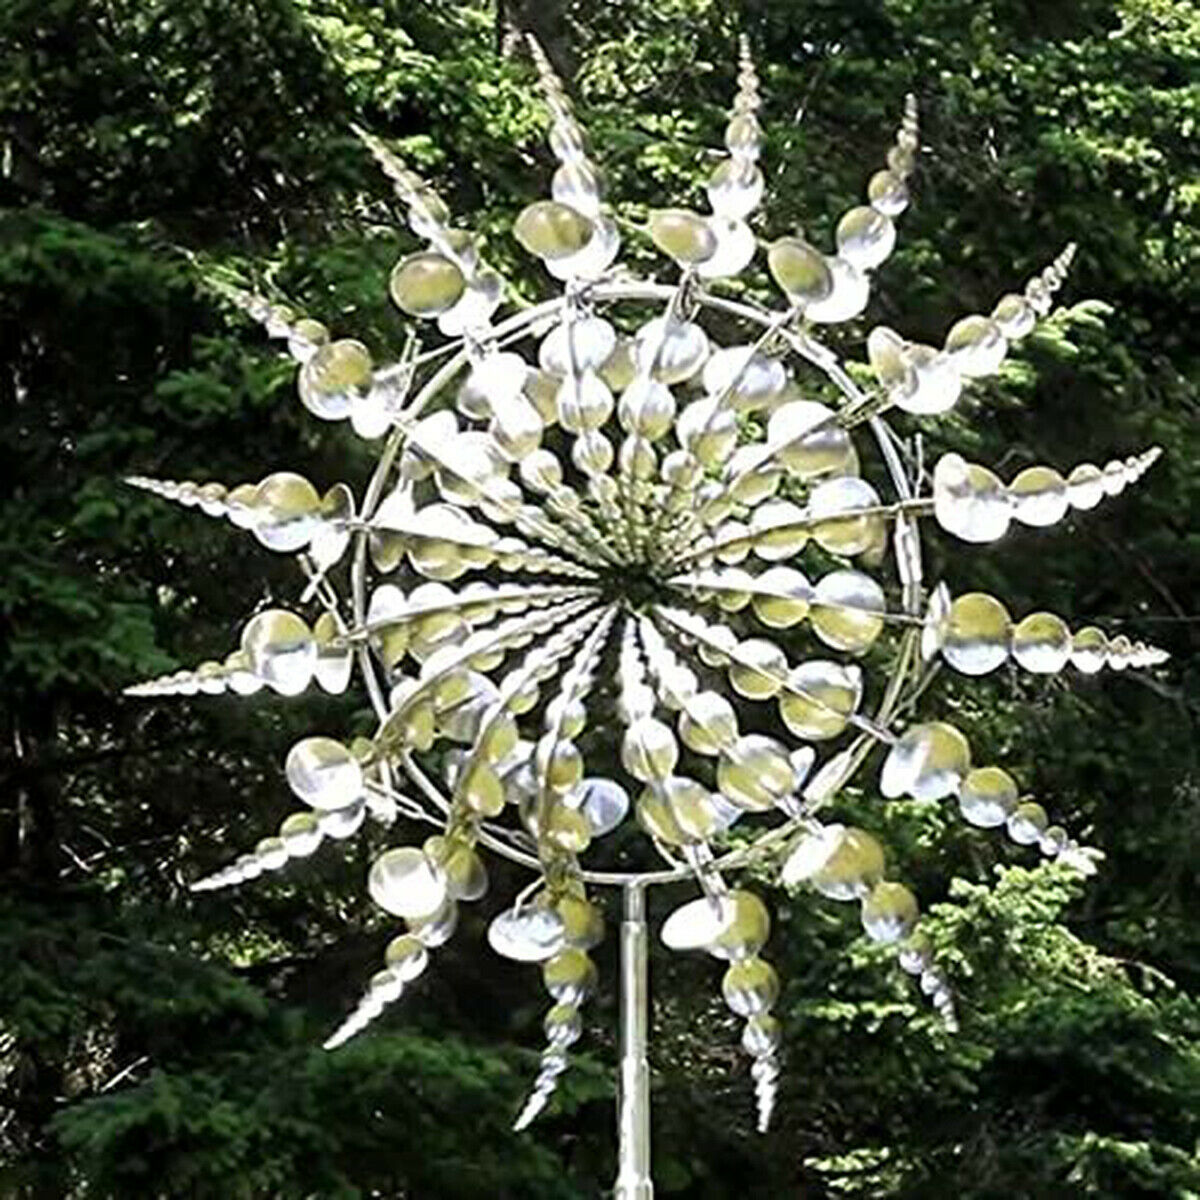 Unique and Magical Metal Windmill Kinetic Metal Wind Spinners Garden Decoration